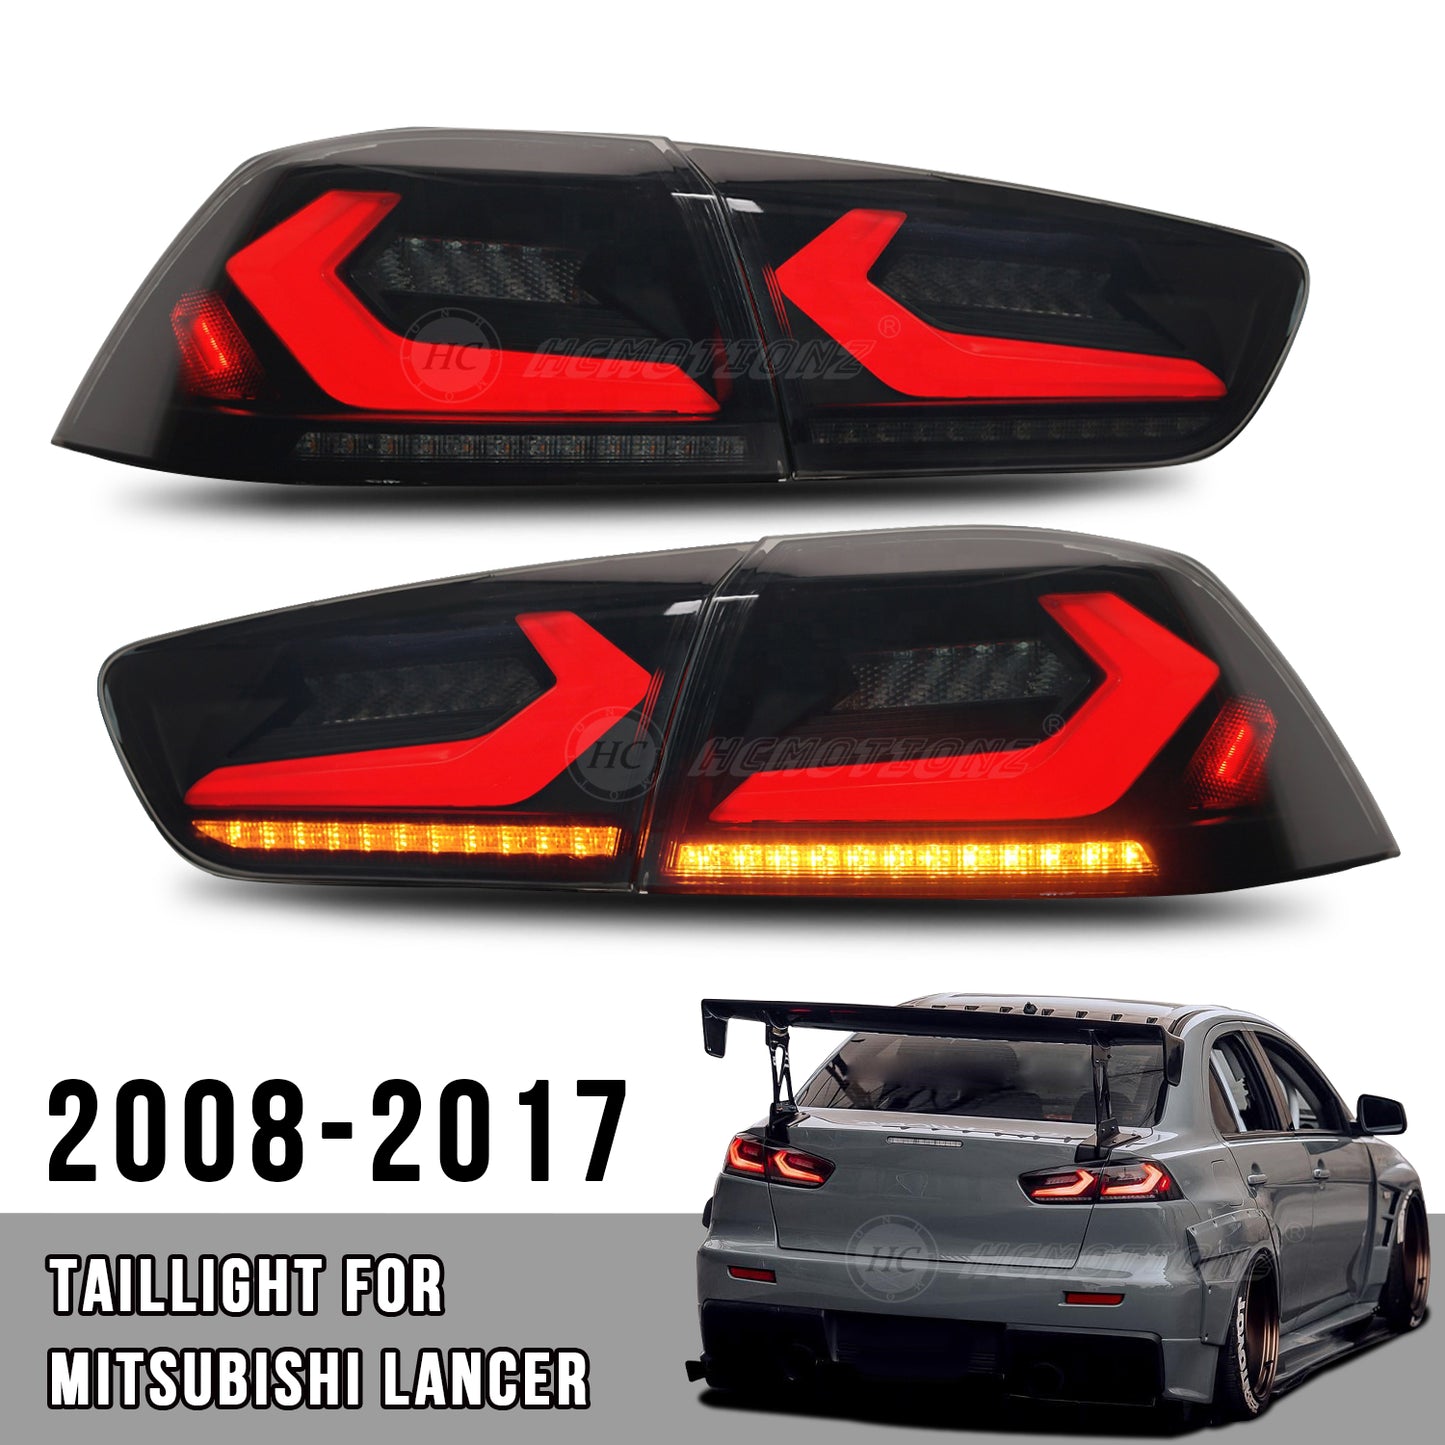 HCMOTION For Mitsubishi Lancer 2008-2017 EVO X Smoked LED Tail Lights 4Pcs Rear Lamp High Quality Emark Certification